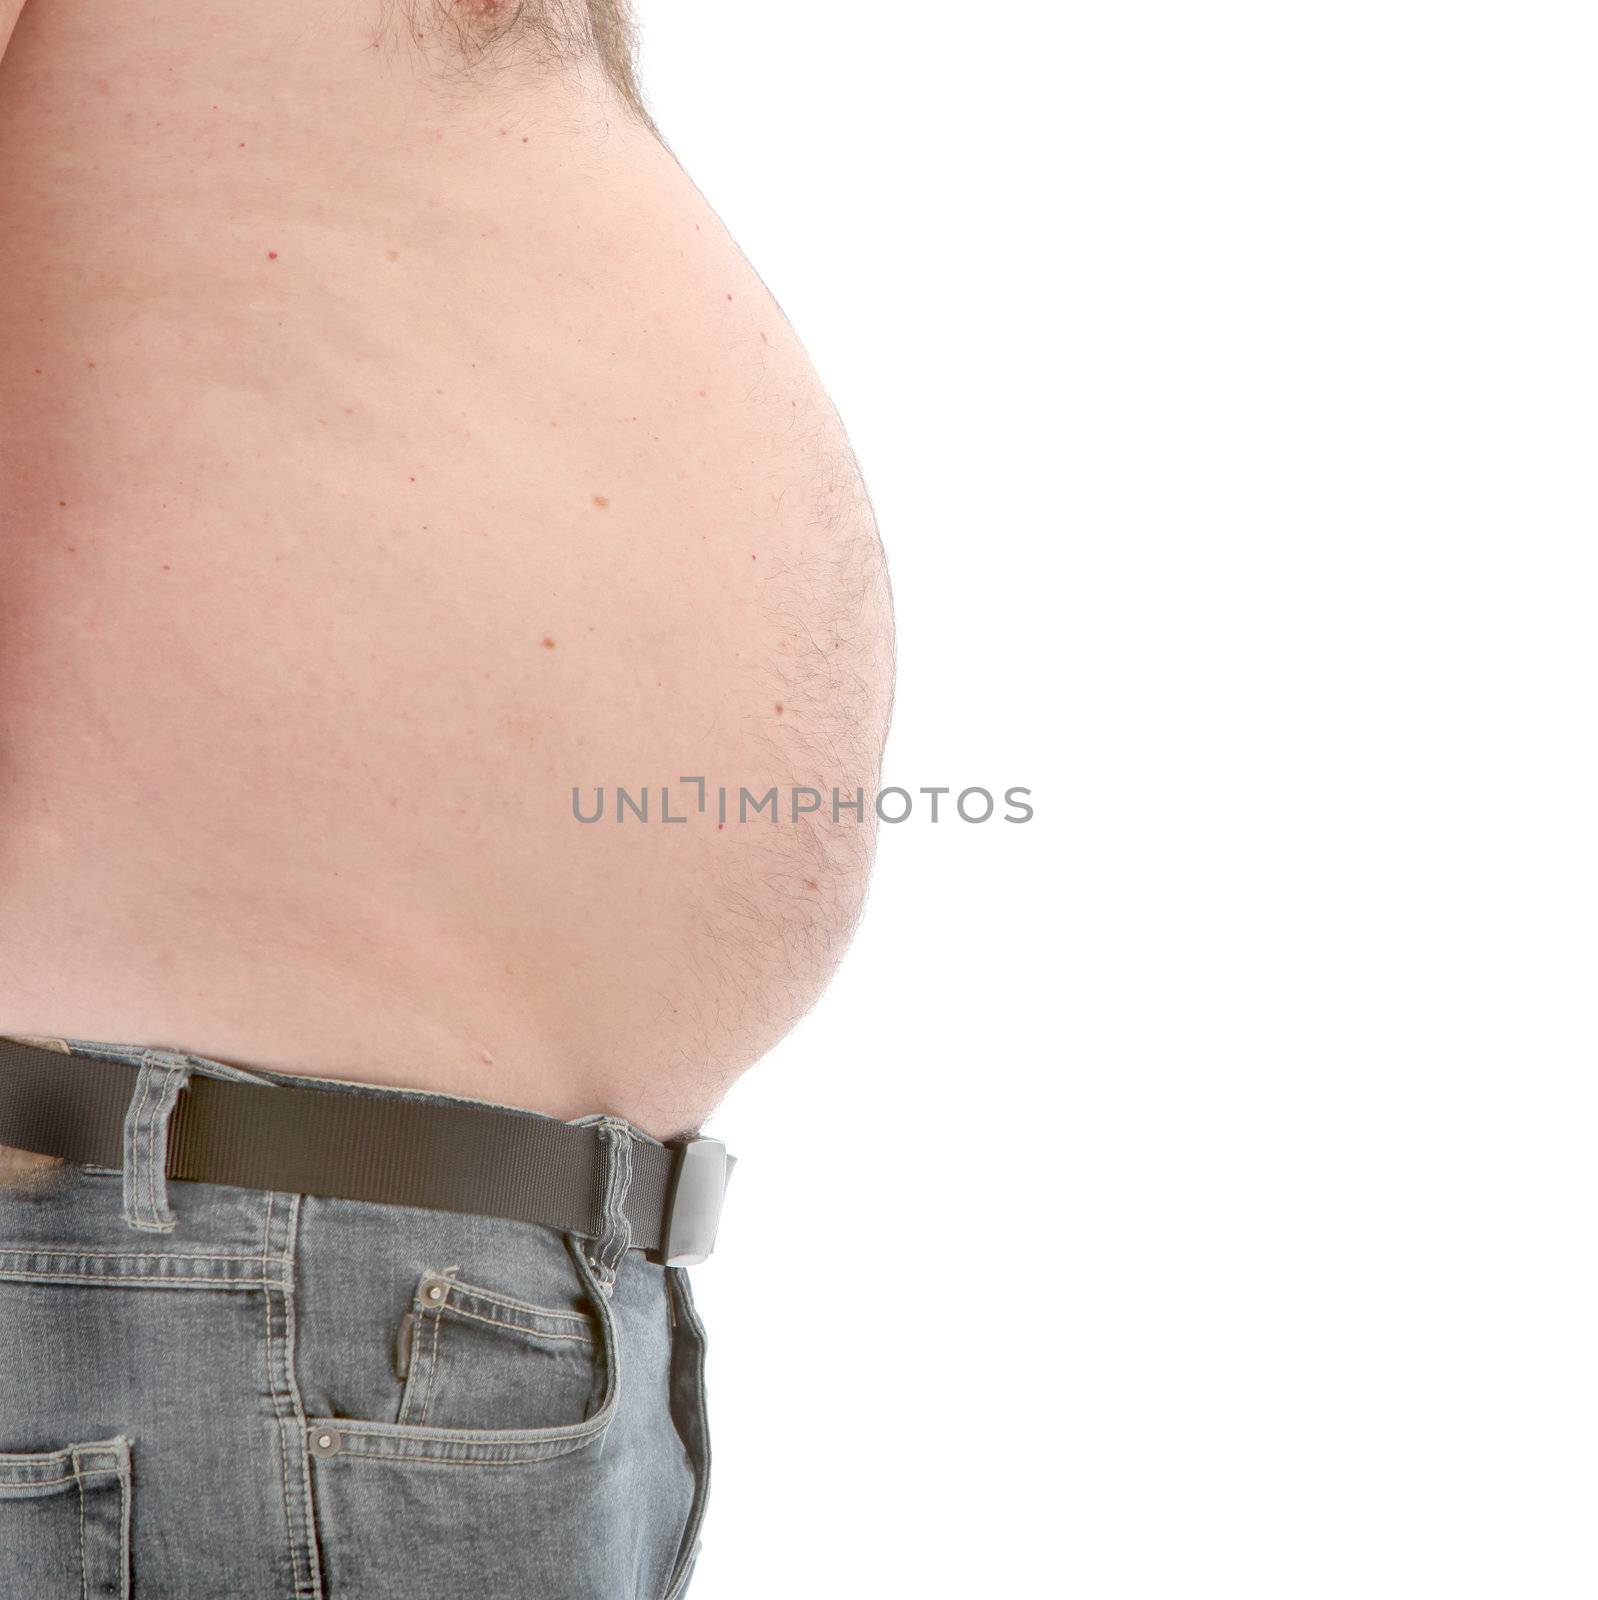 Fat belly of a man - side view with space for text